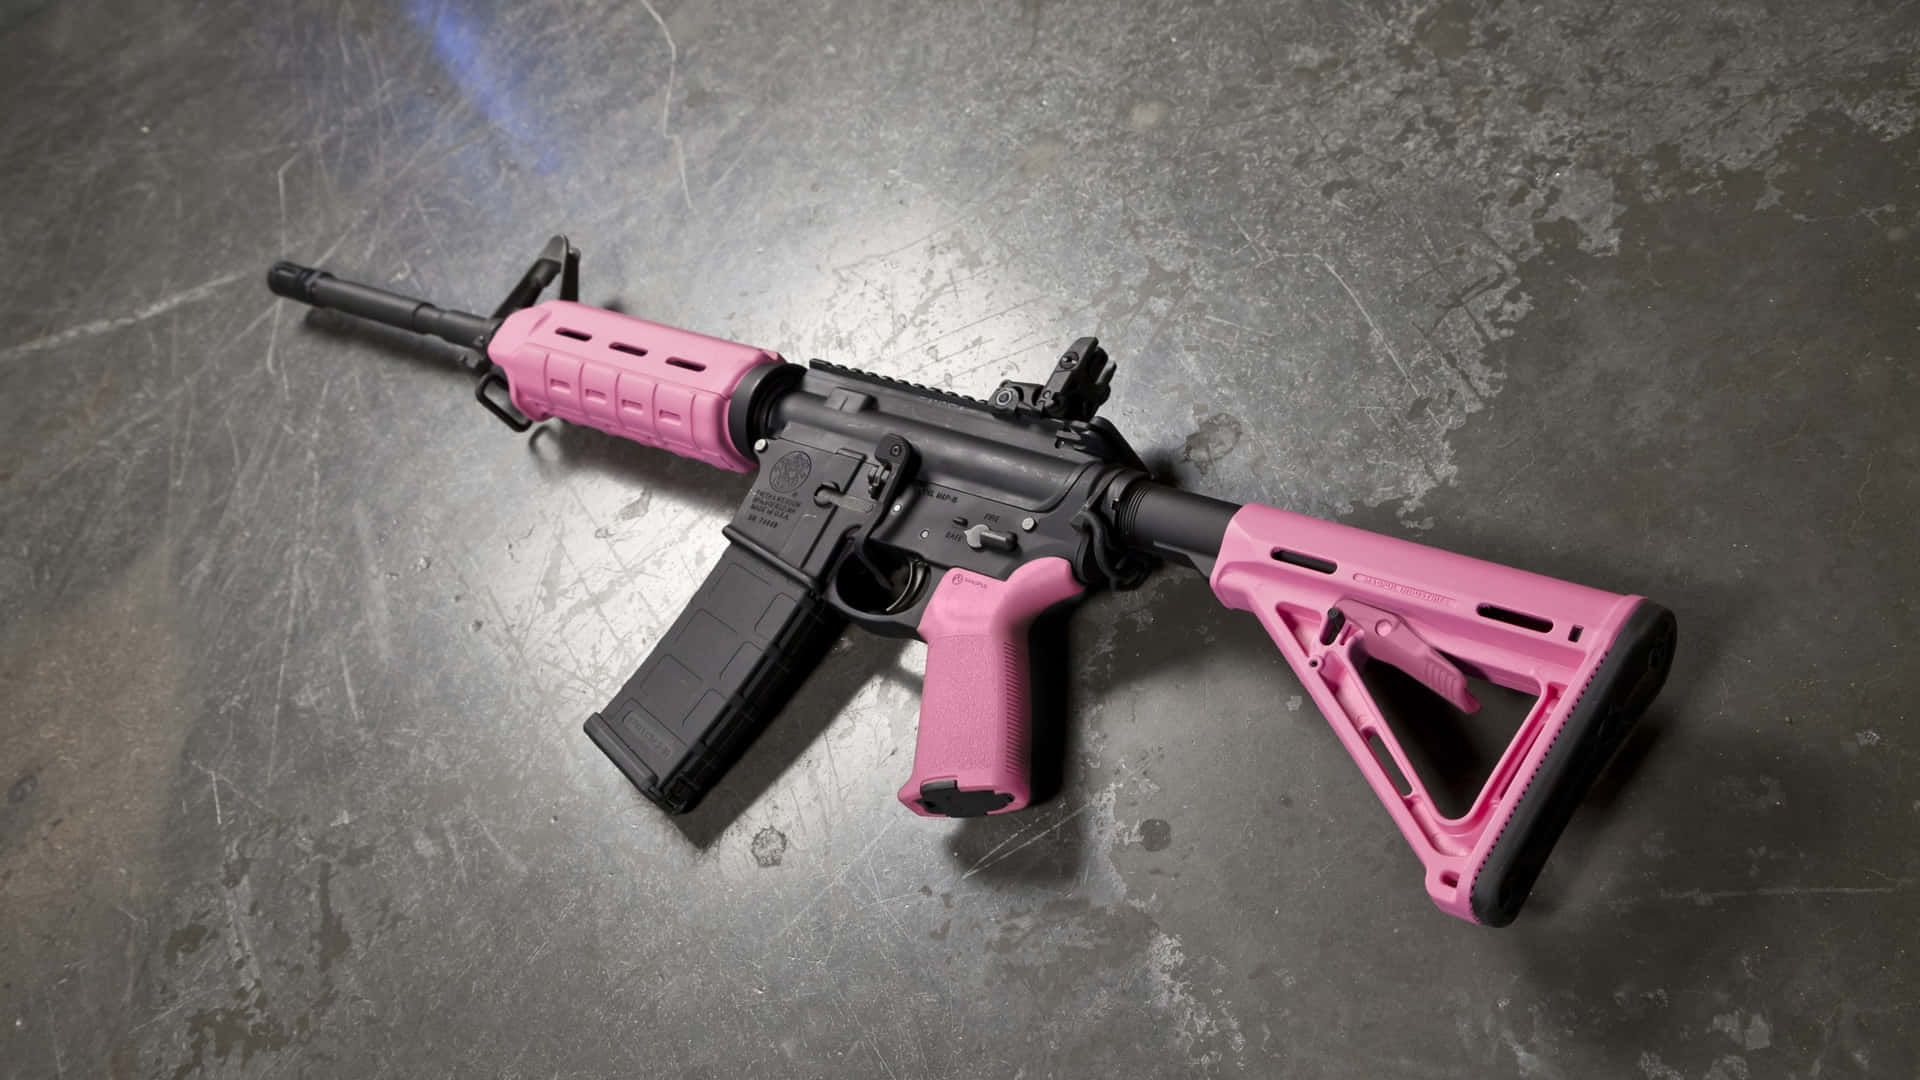 A Pink Ar-15 Rifle On A Concrete Surface